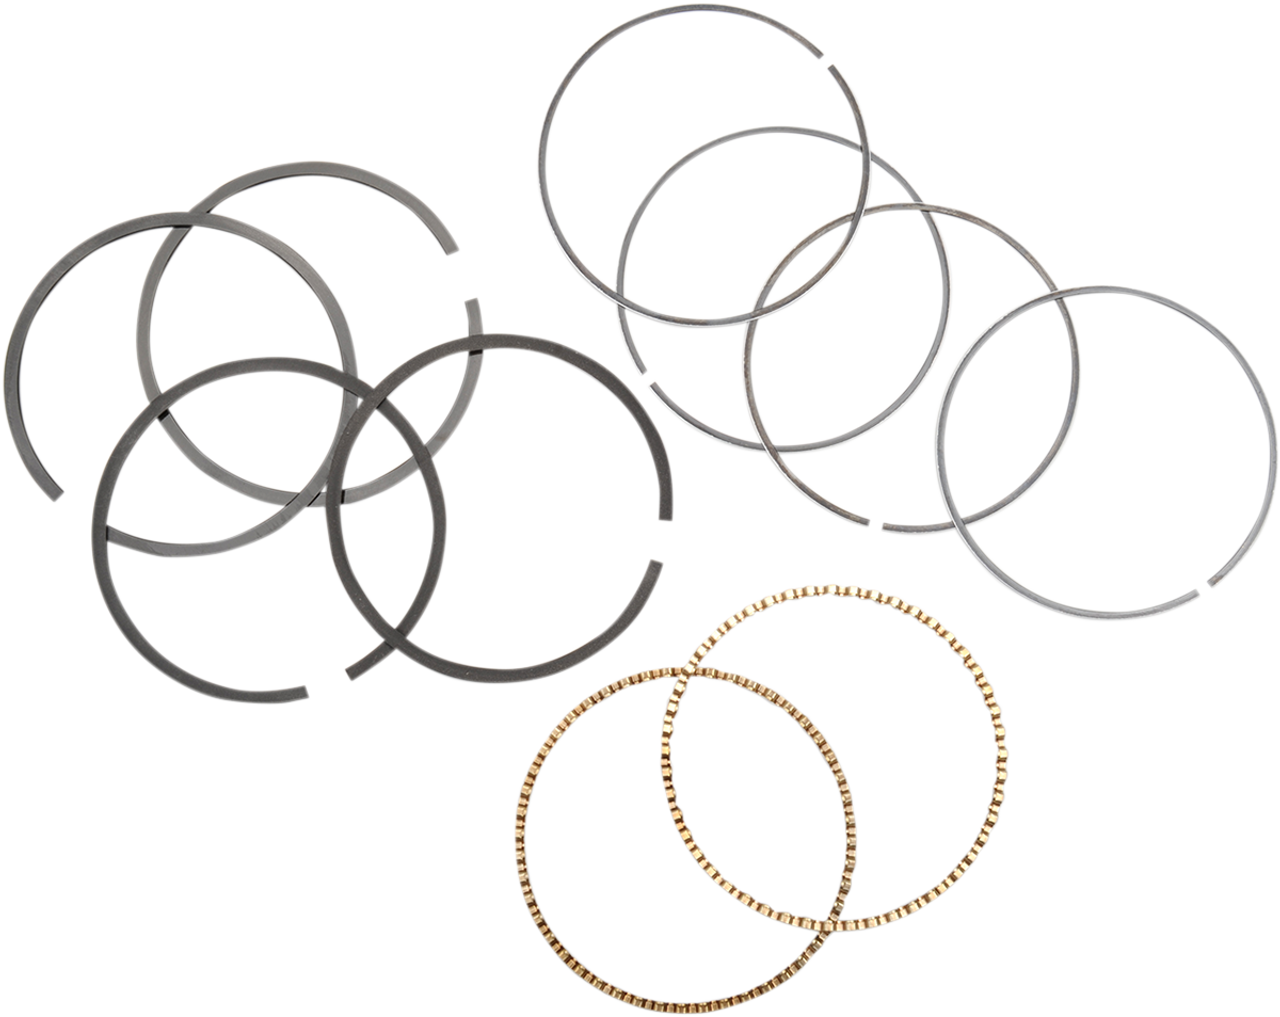 S&S Cycle Replacement Rings